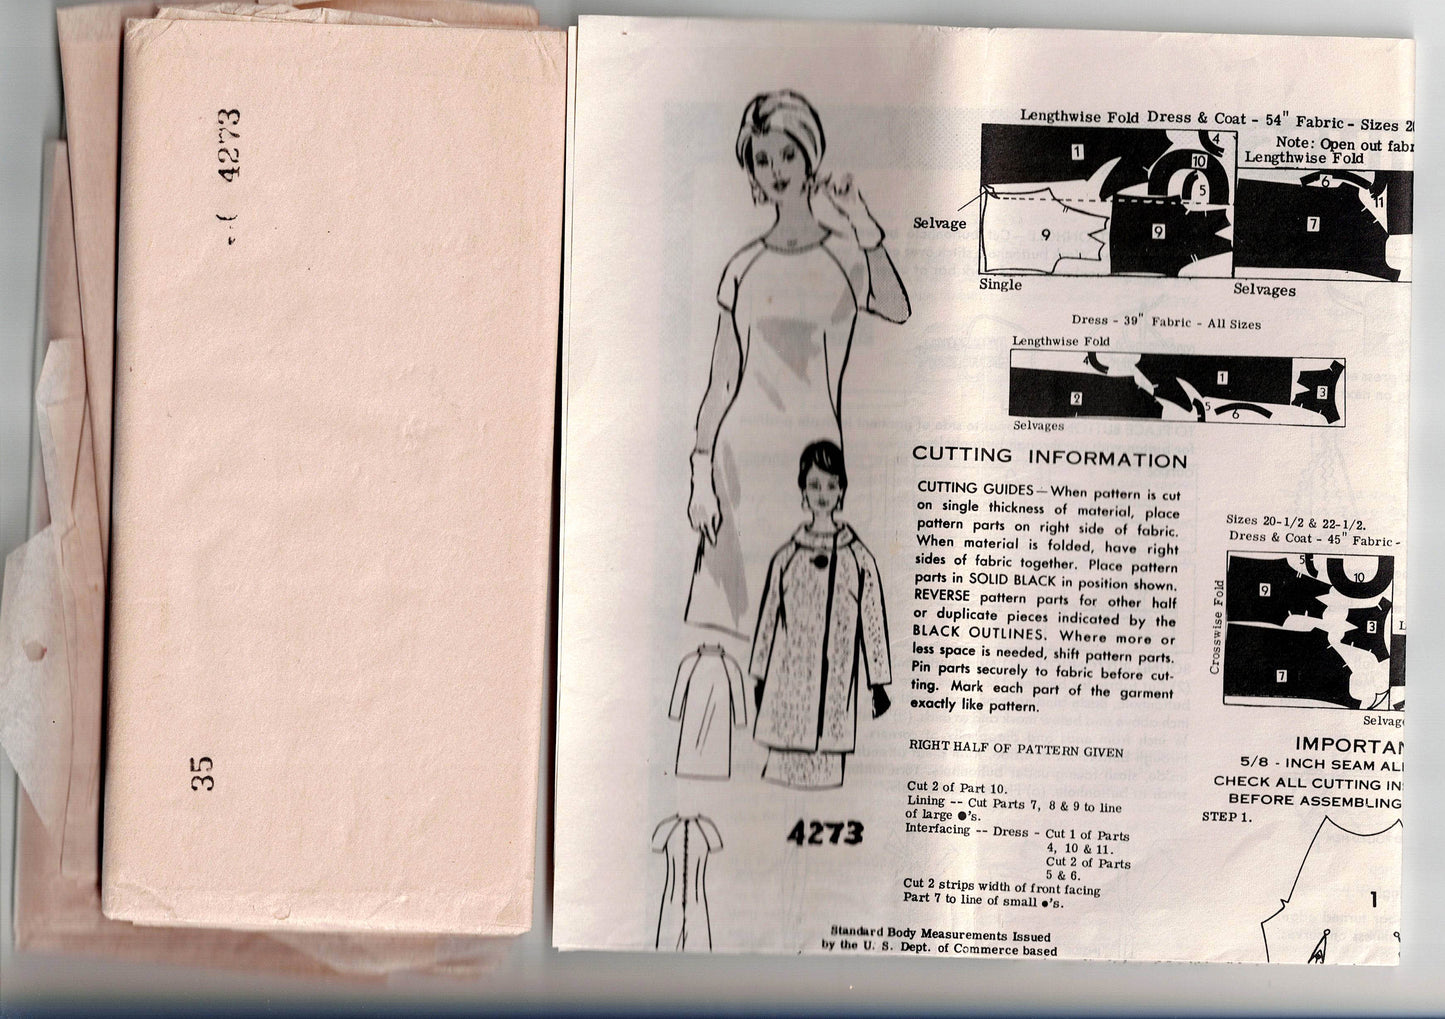 Mail Order 4273 Womens Half Size Raglan Sleeved Coat & Dress 1960s Vintage Sewing Pattern Bust 35 inches